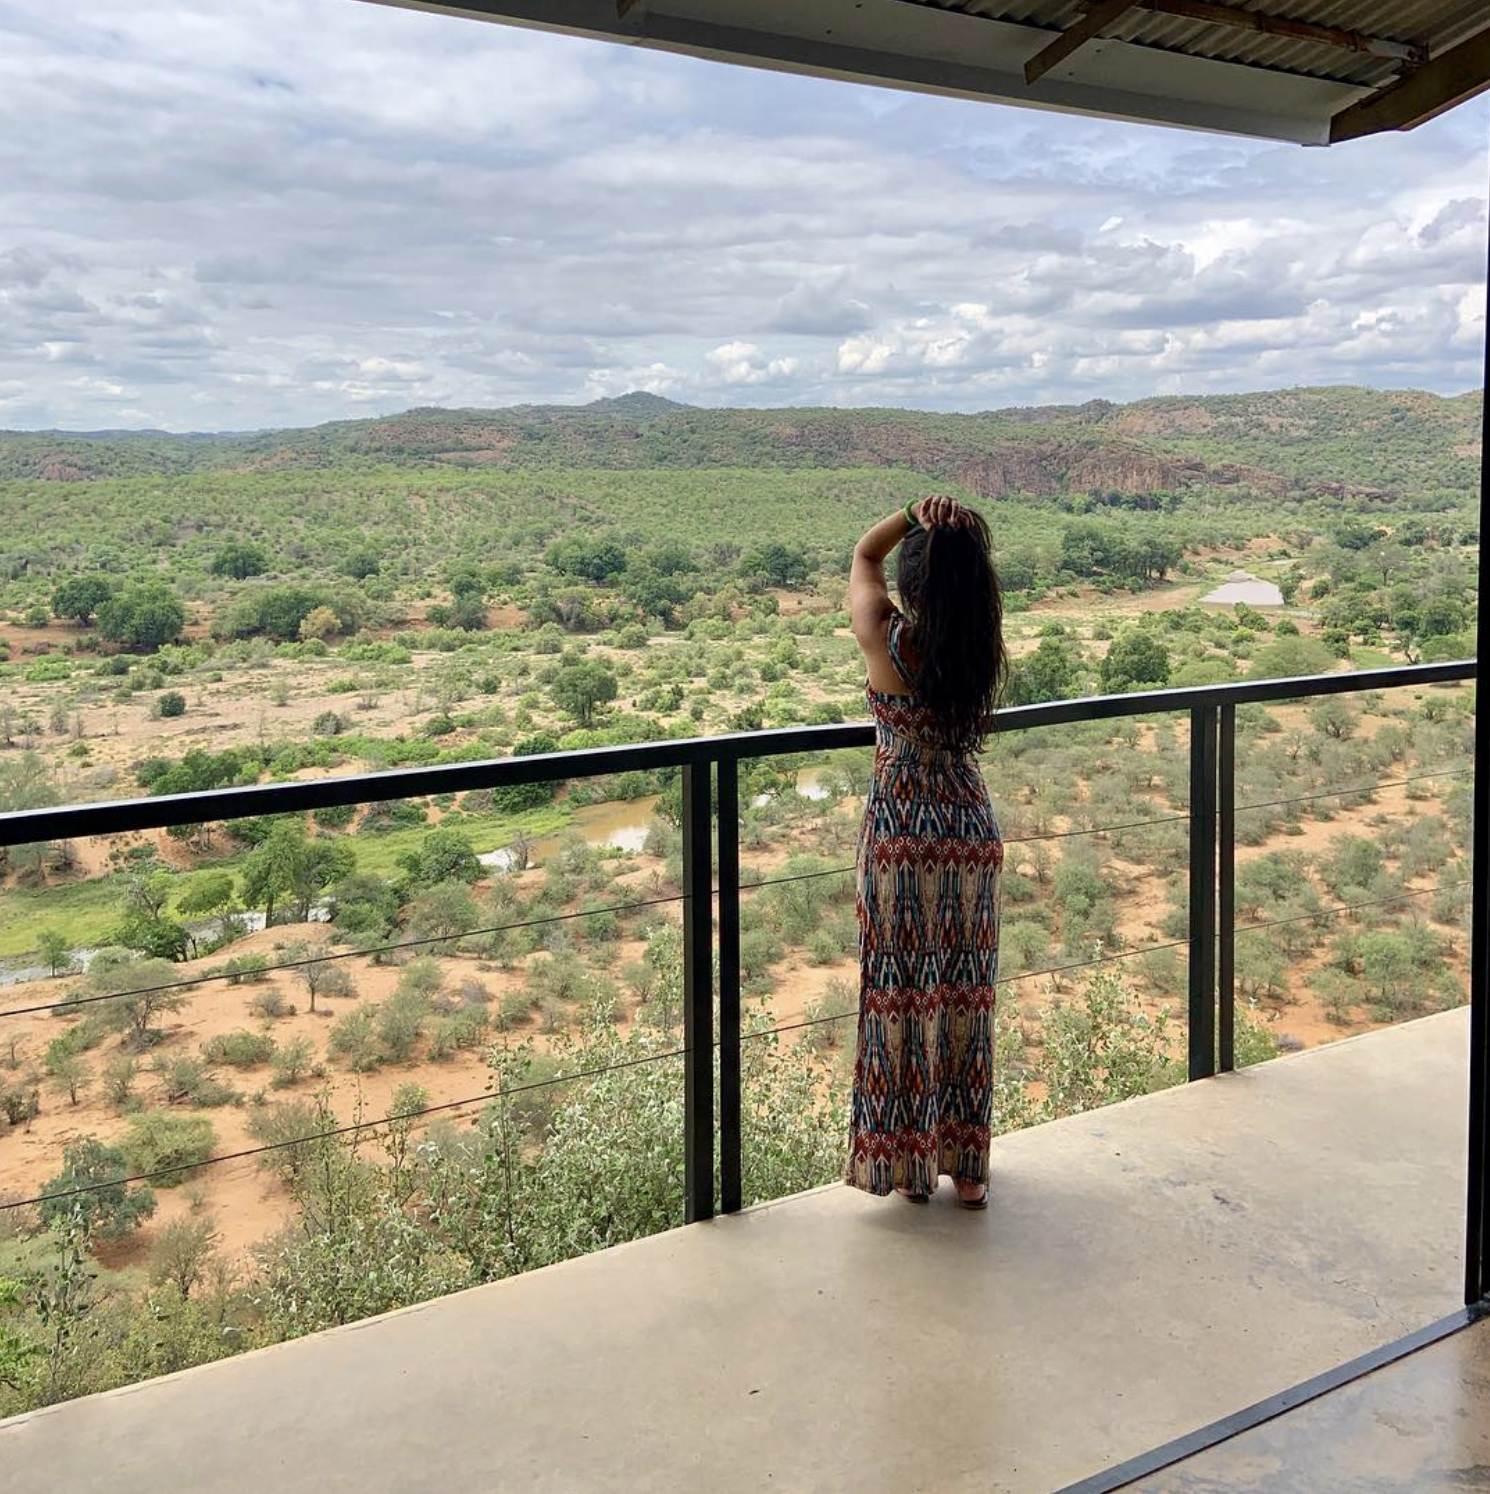 First thing on the agenda upon arrival at The Outpost Lodge? Get acquainted with your luxury space and take in the expansive views. @dharadaily is pictured here doing just that.